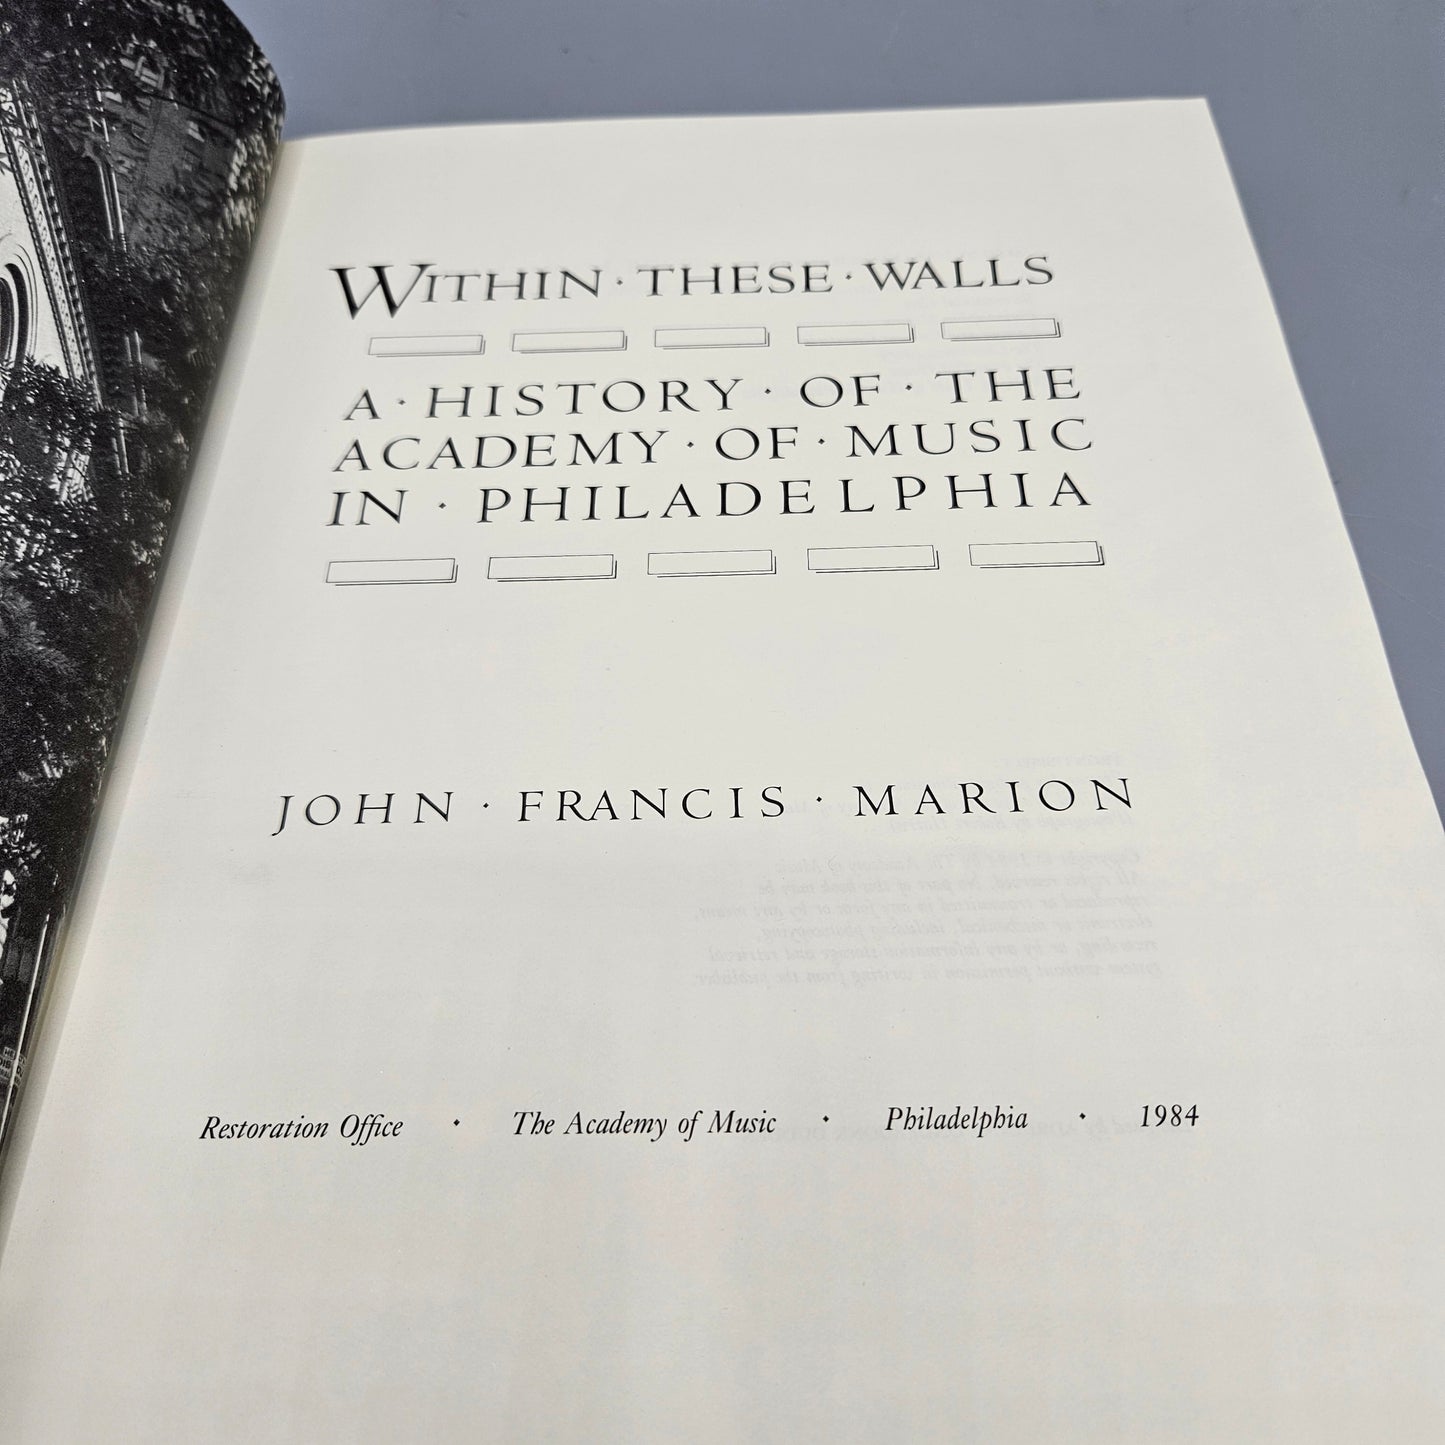 John Francis Marion - Within These Walls: A History of the Academy of Music in Philadelphia